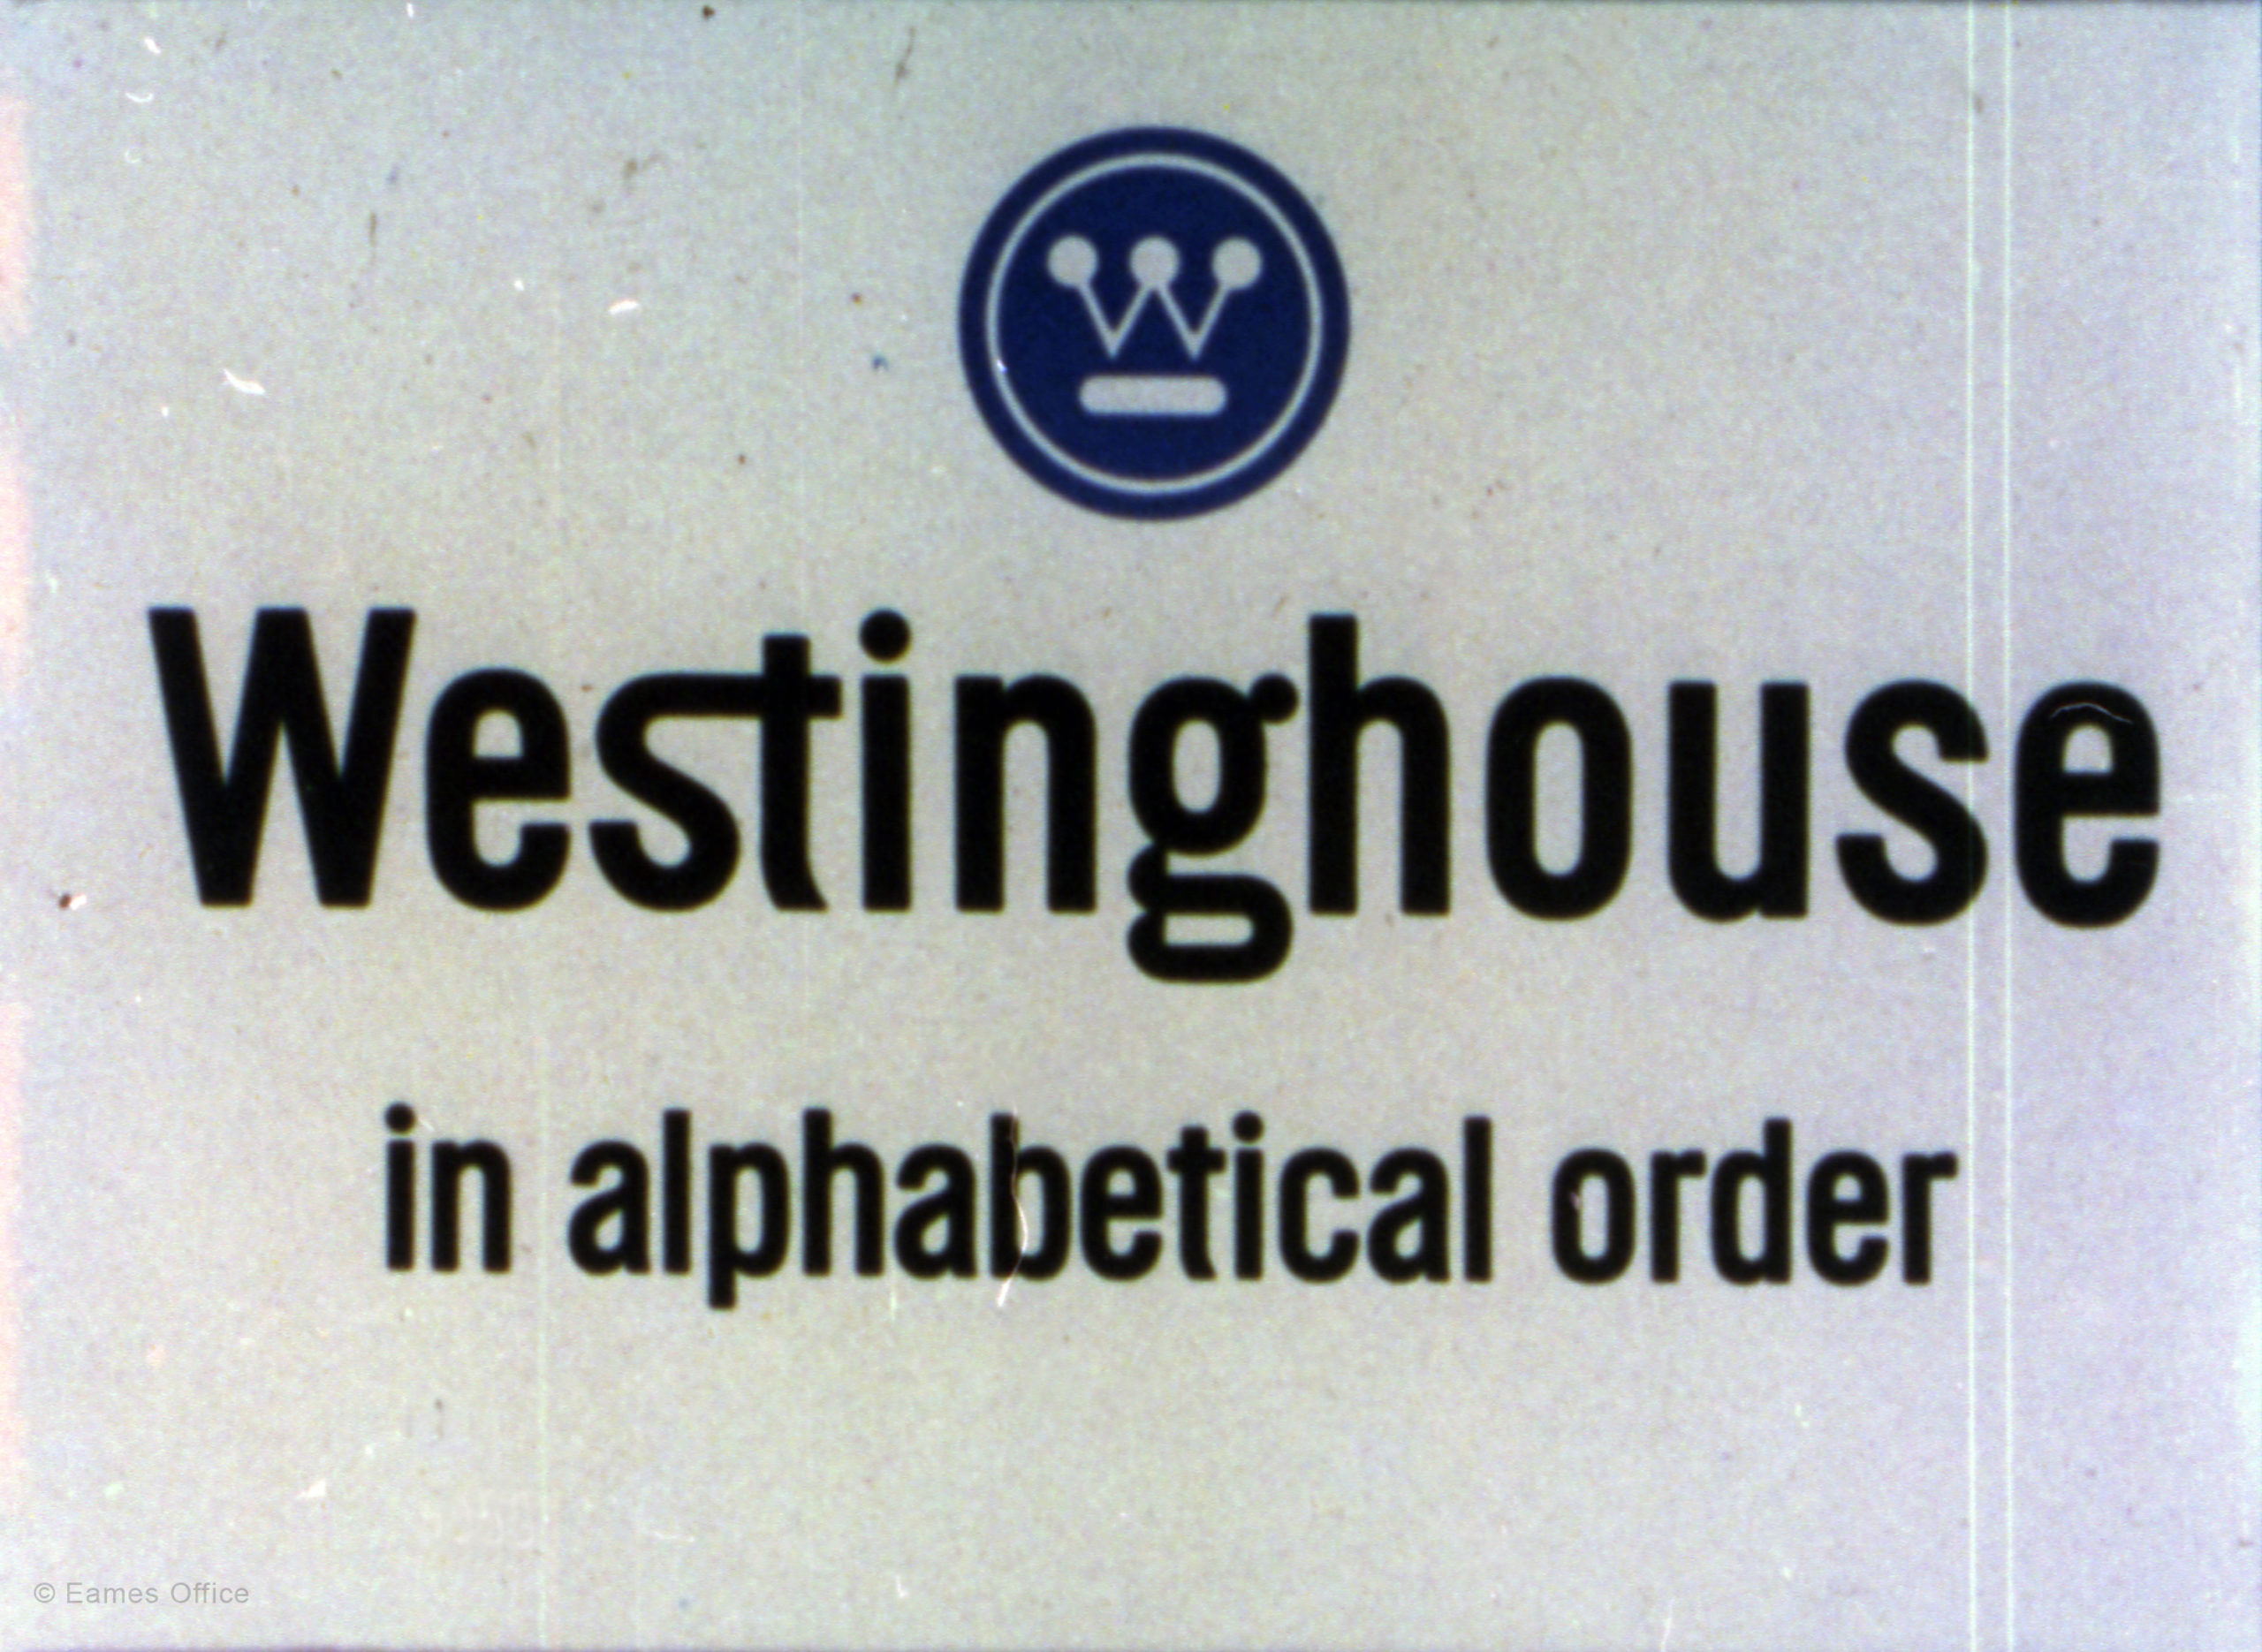 Westinghouse in Alphabetical Order - Eames Office